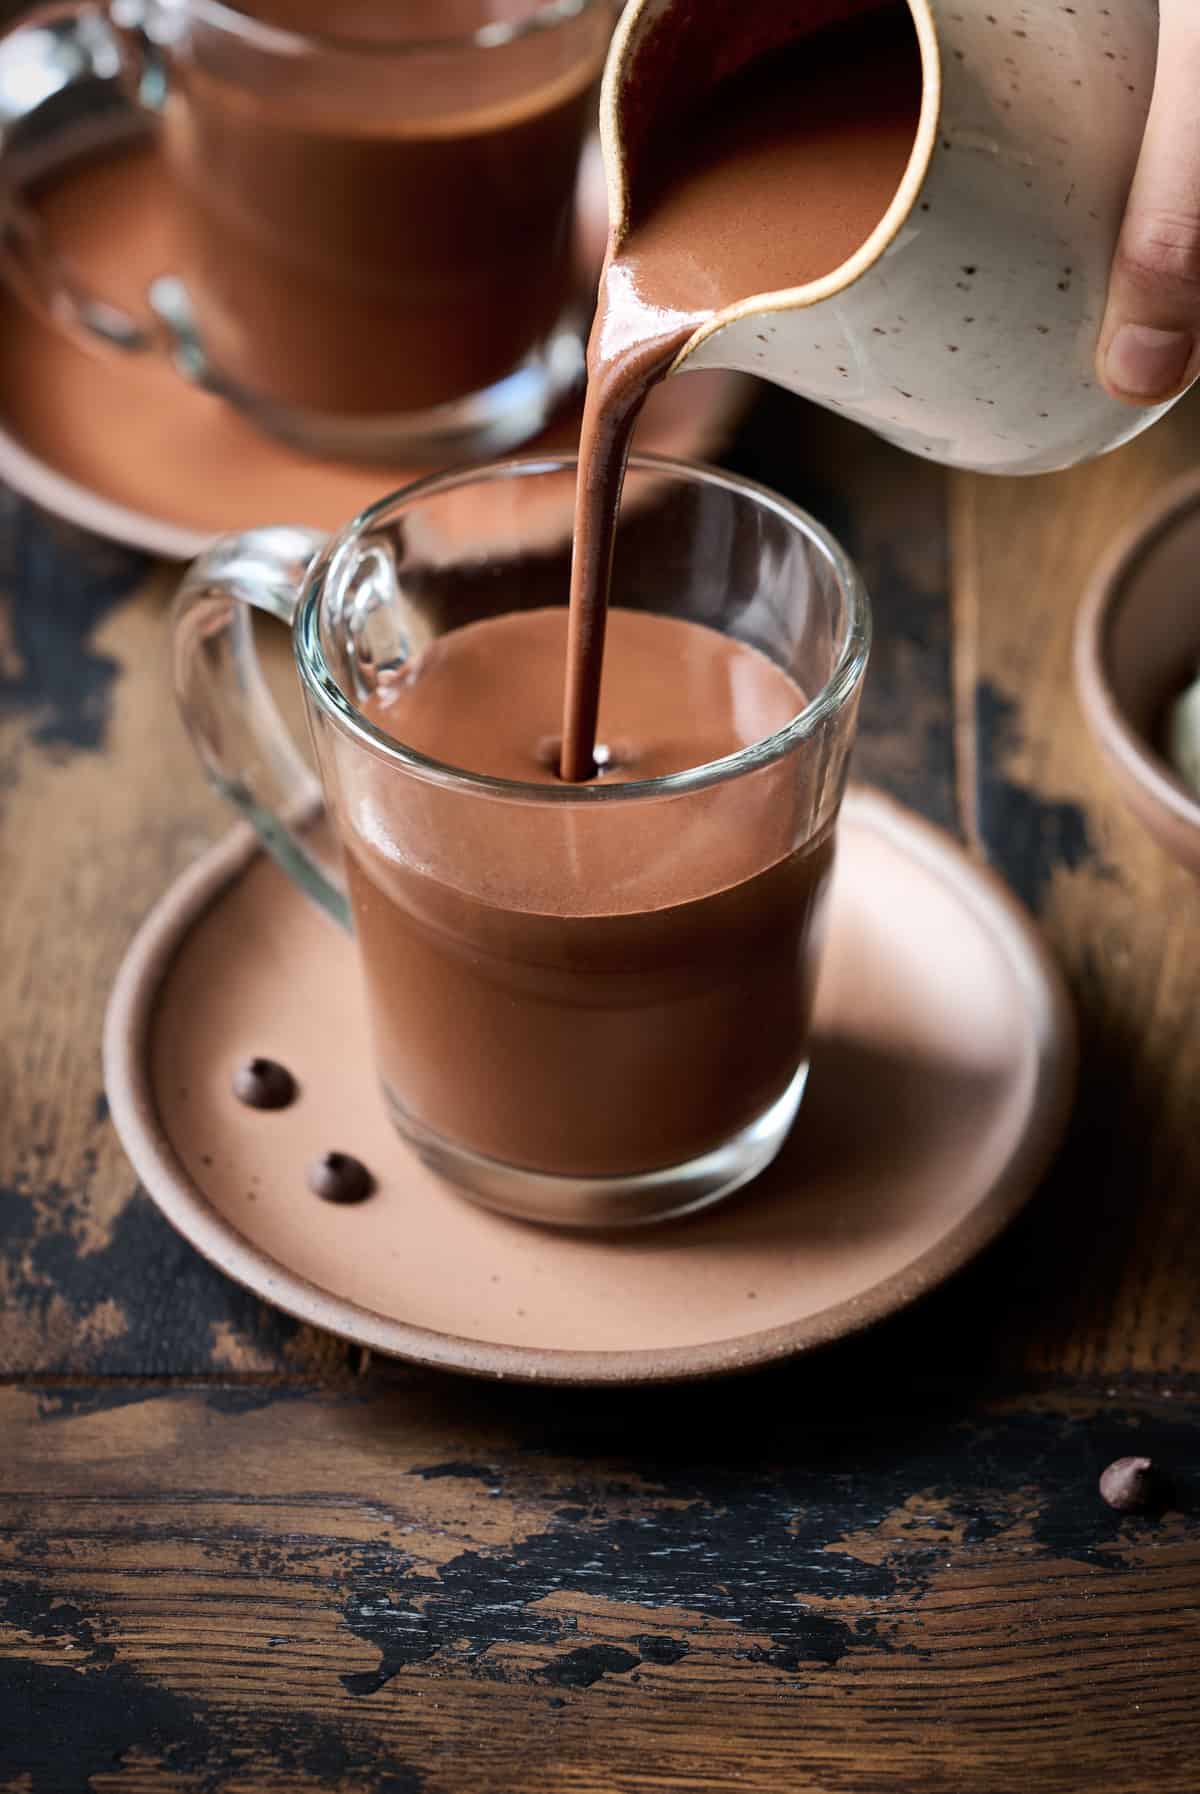 Hot-chocolate-cover-image-1-of-1.jpg